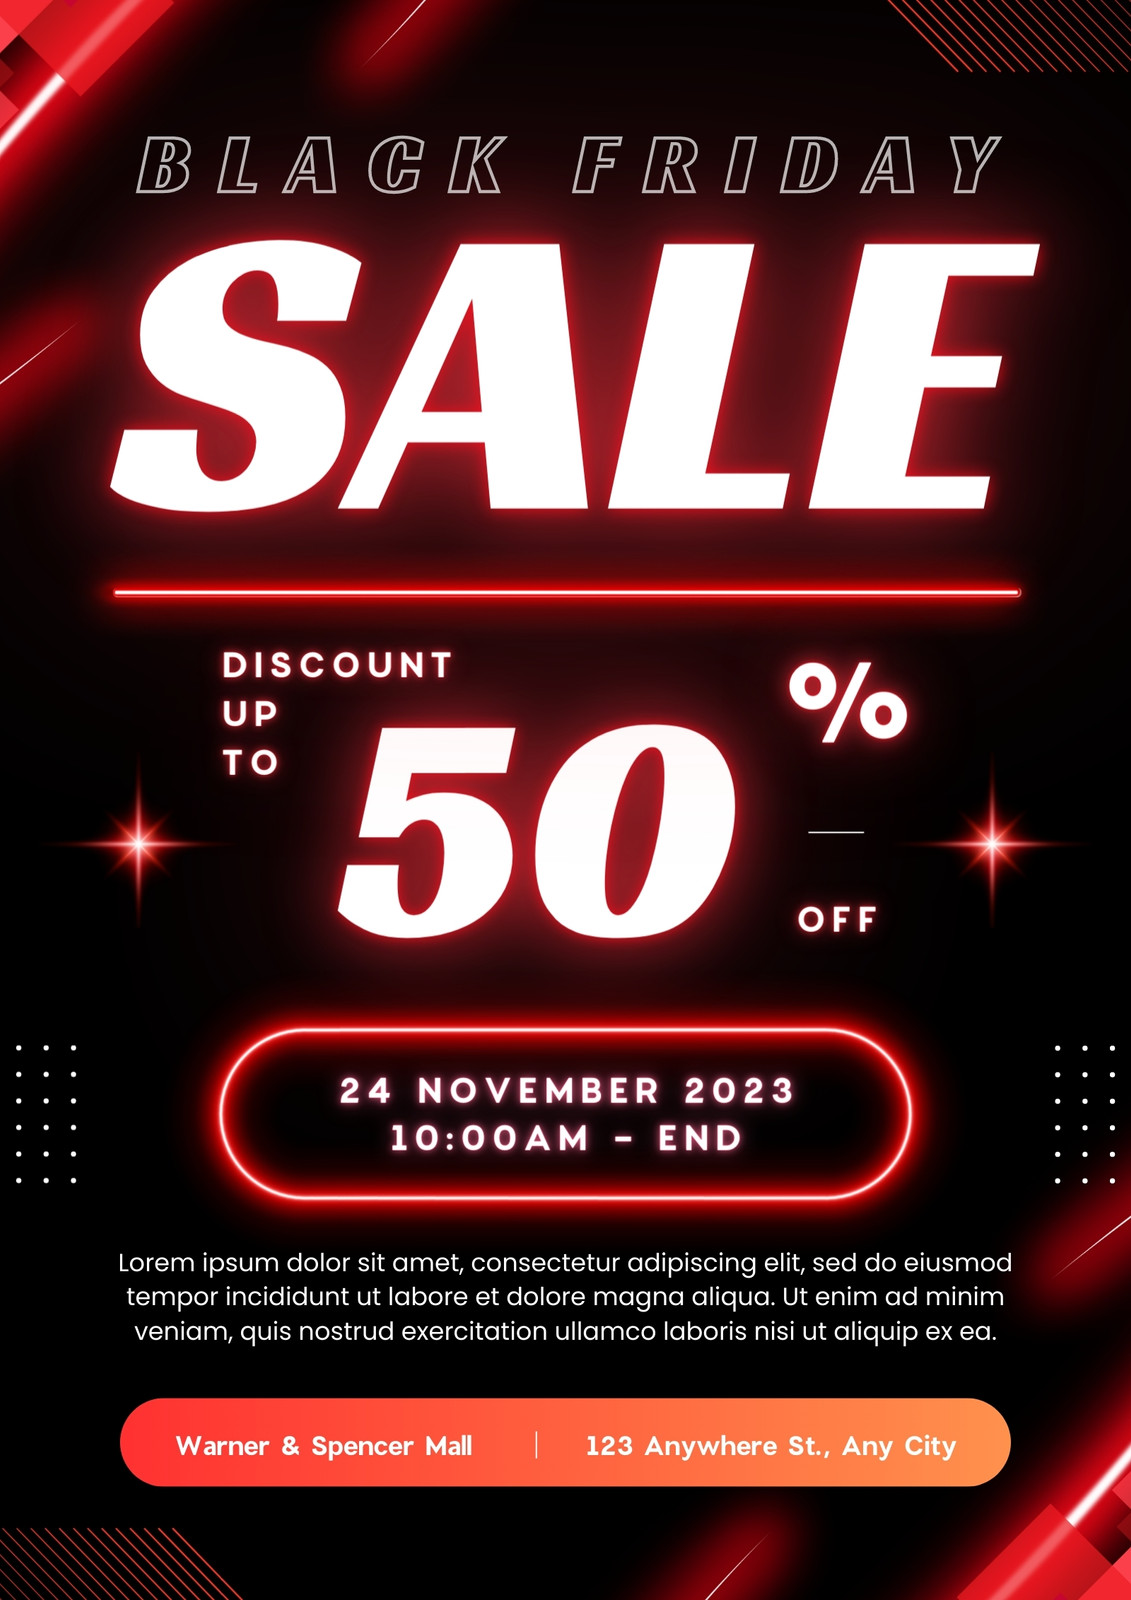 https://marketplace.canva.com/EAFlaIMmWuw/1/0/1131w/canva-bold-neon-black-and-red-modern-black-friday-sale-flyer-XjCzq4YTOYo.jpg